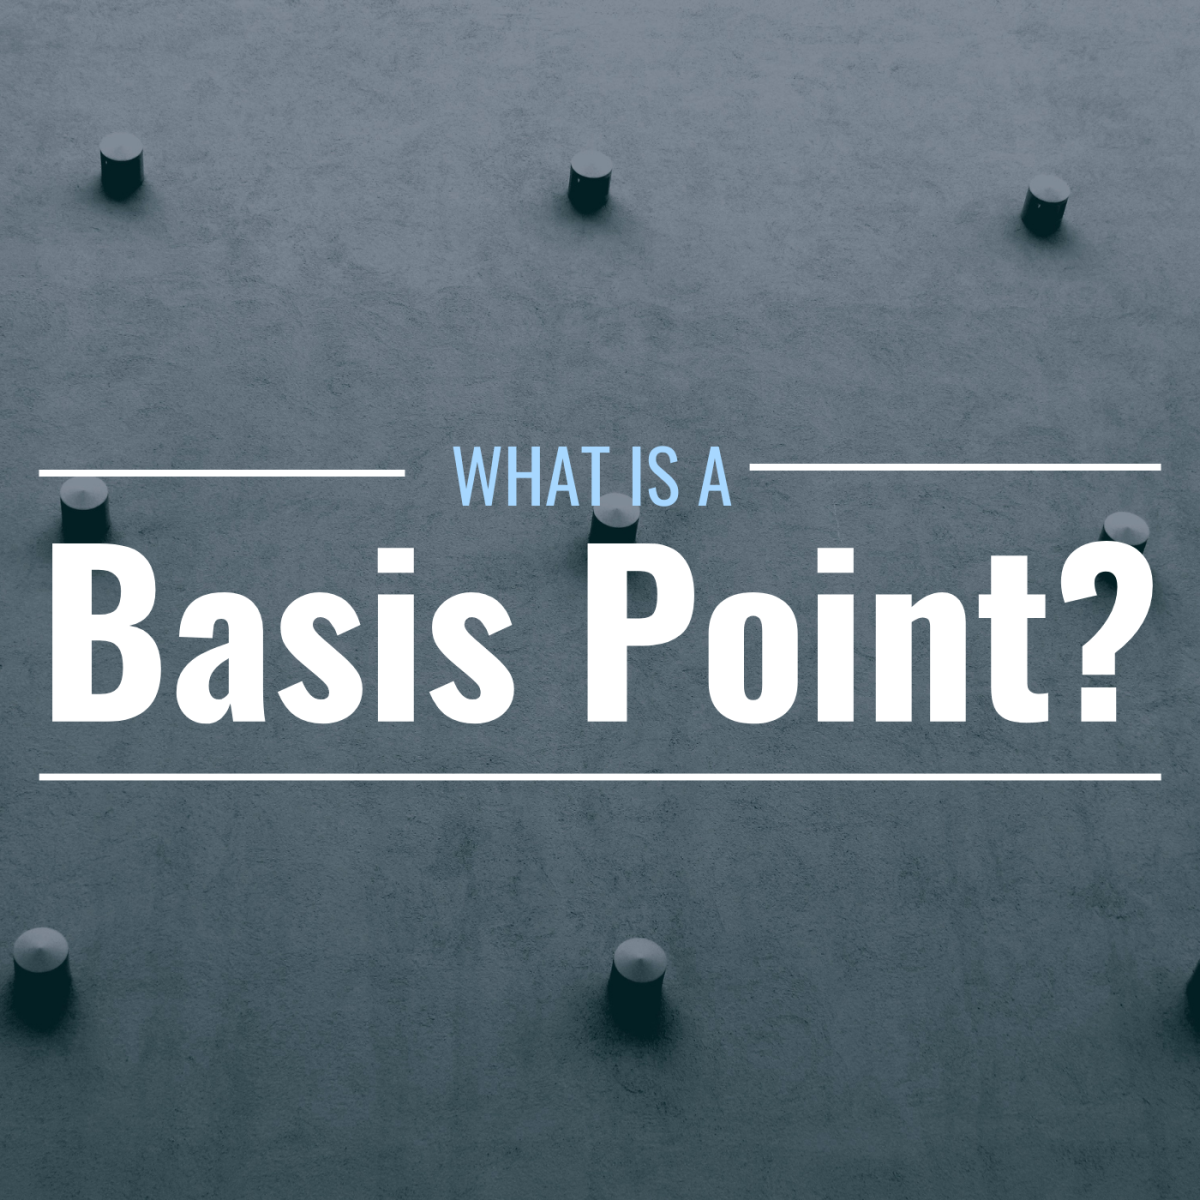 Studded climbing wall with text overlay: "What Is a Basis Point?"